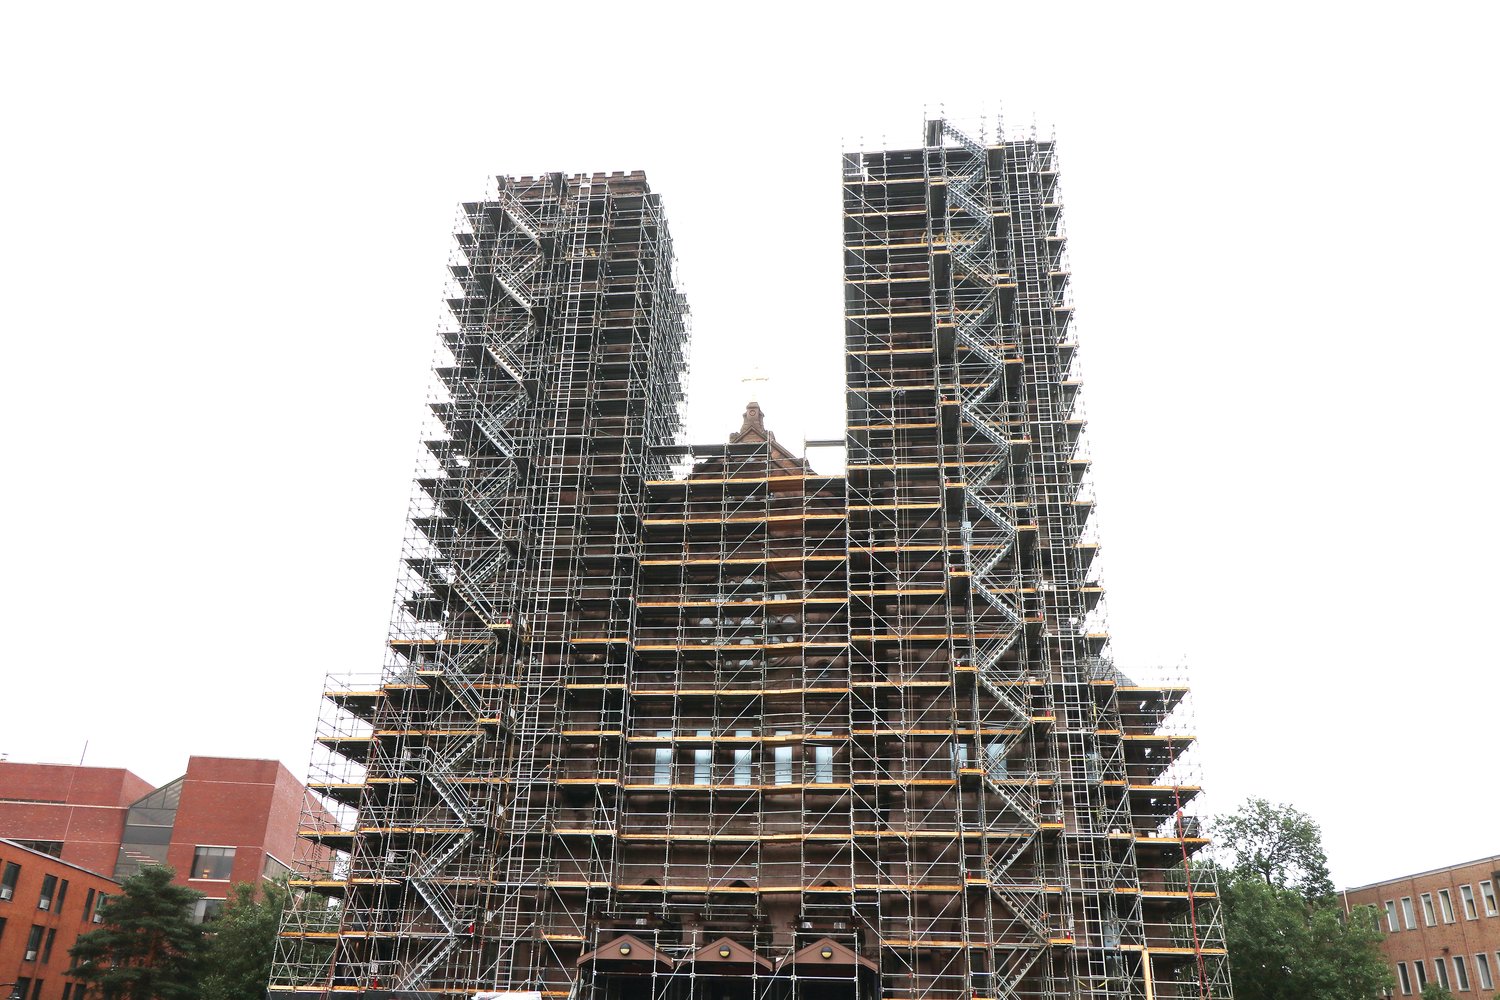 Scaffolding extends 20 stories into the air, protecting the workers who will spend the next seven months repairing erosion in the towers of the Cathedral of SS. Peter and Paul, which was consecrated in 1889 and serves as the seat of the Diocese of Providence.